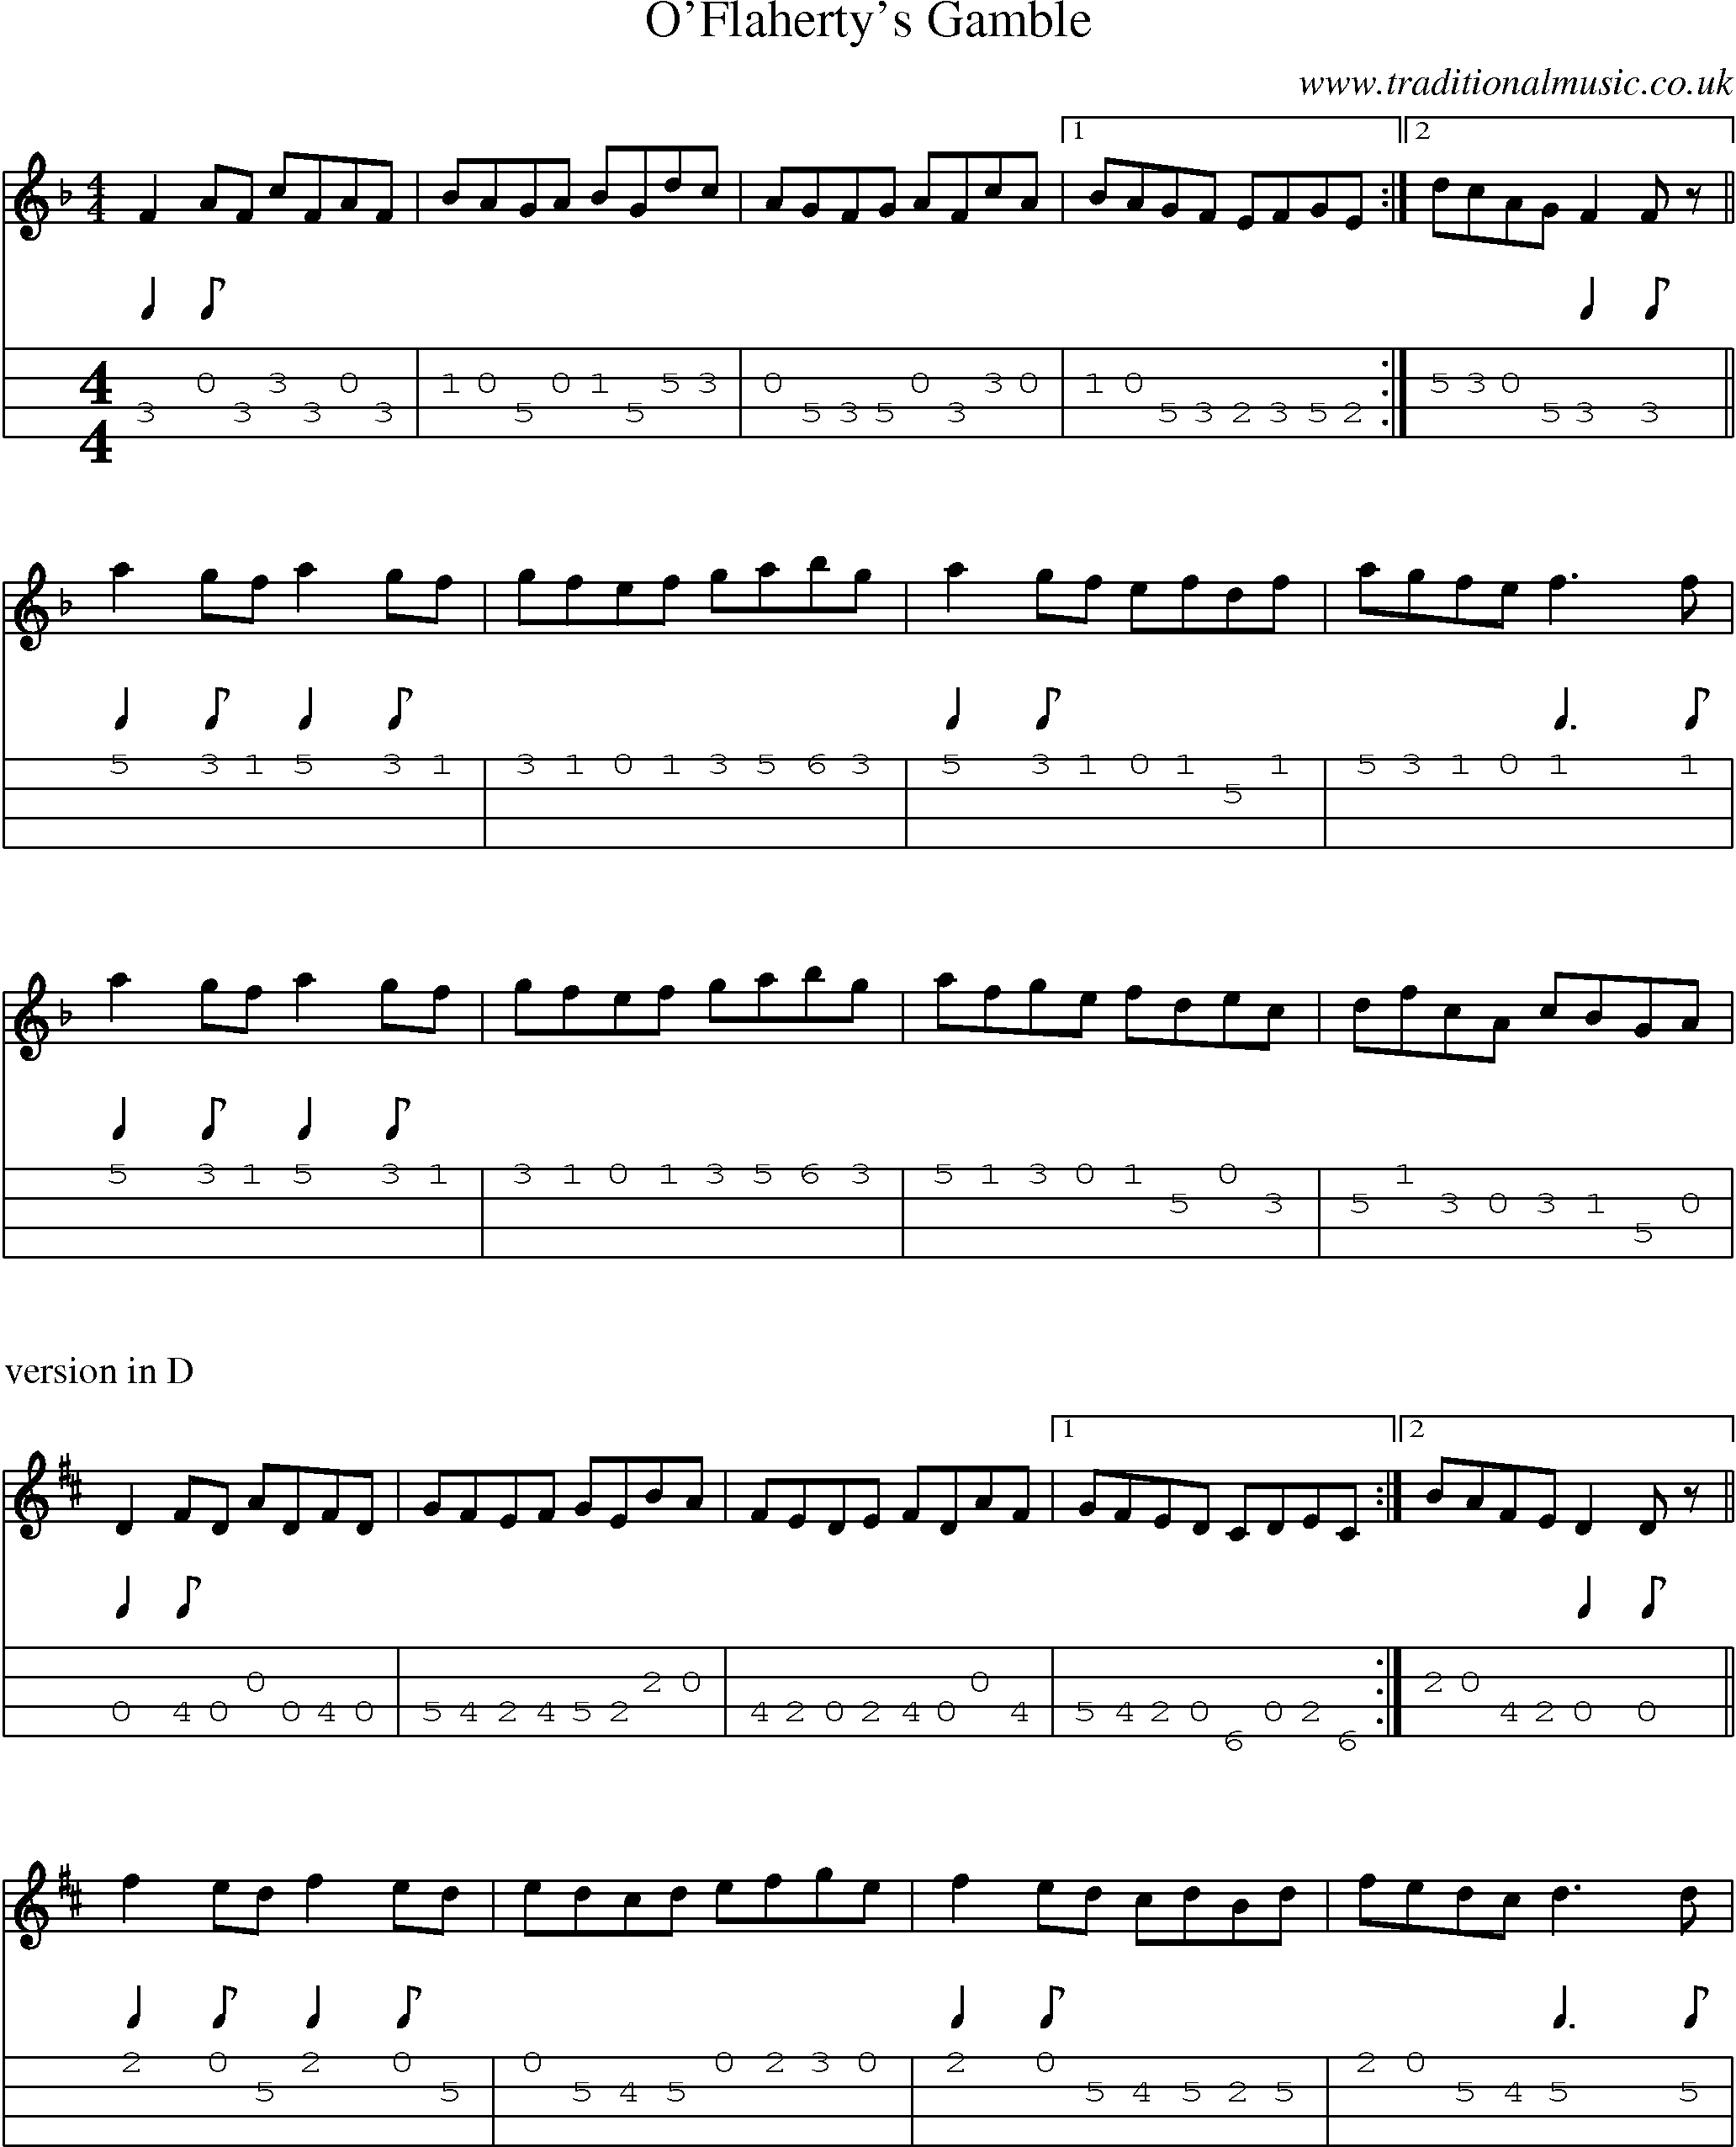 Music Score and Mandolin Tabs for Oflahertys Gamble